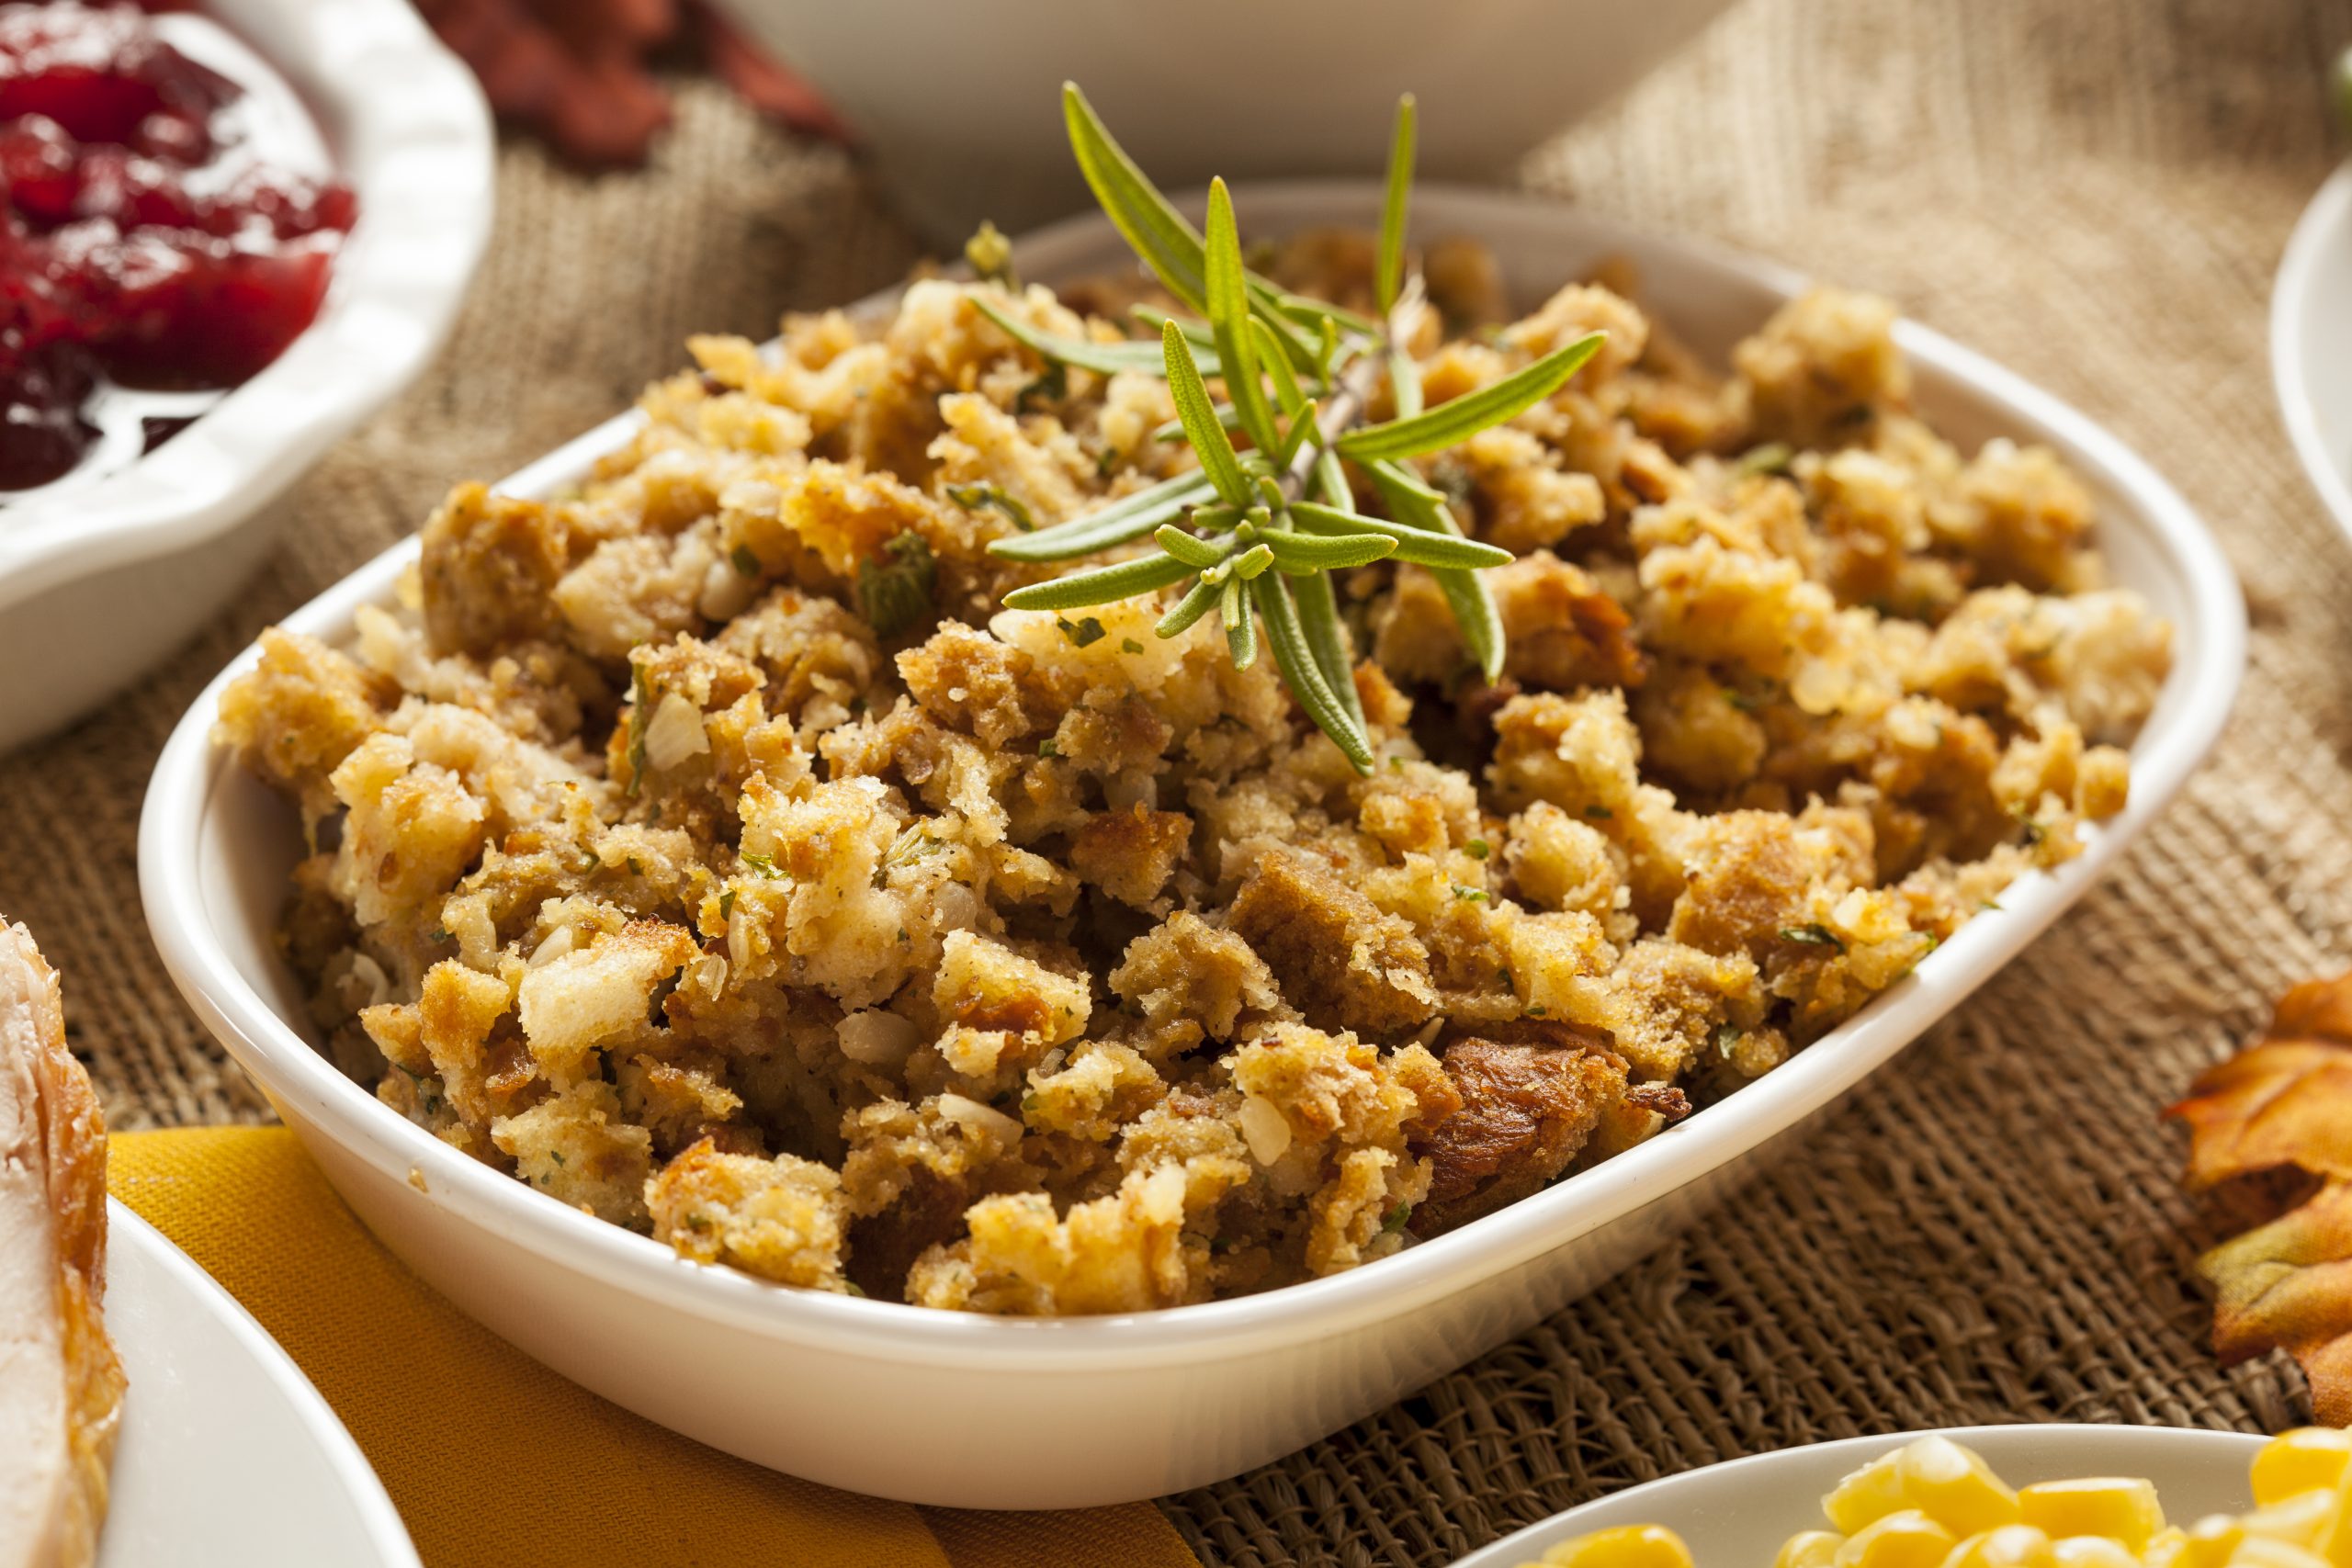 Homemade,Thanksgiving,Stuffing,Made,With,Bread,And,Herbs